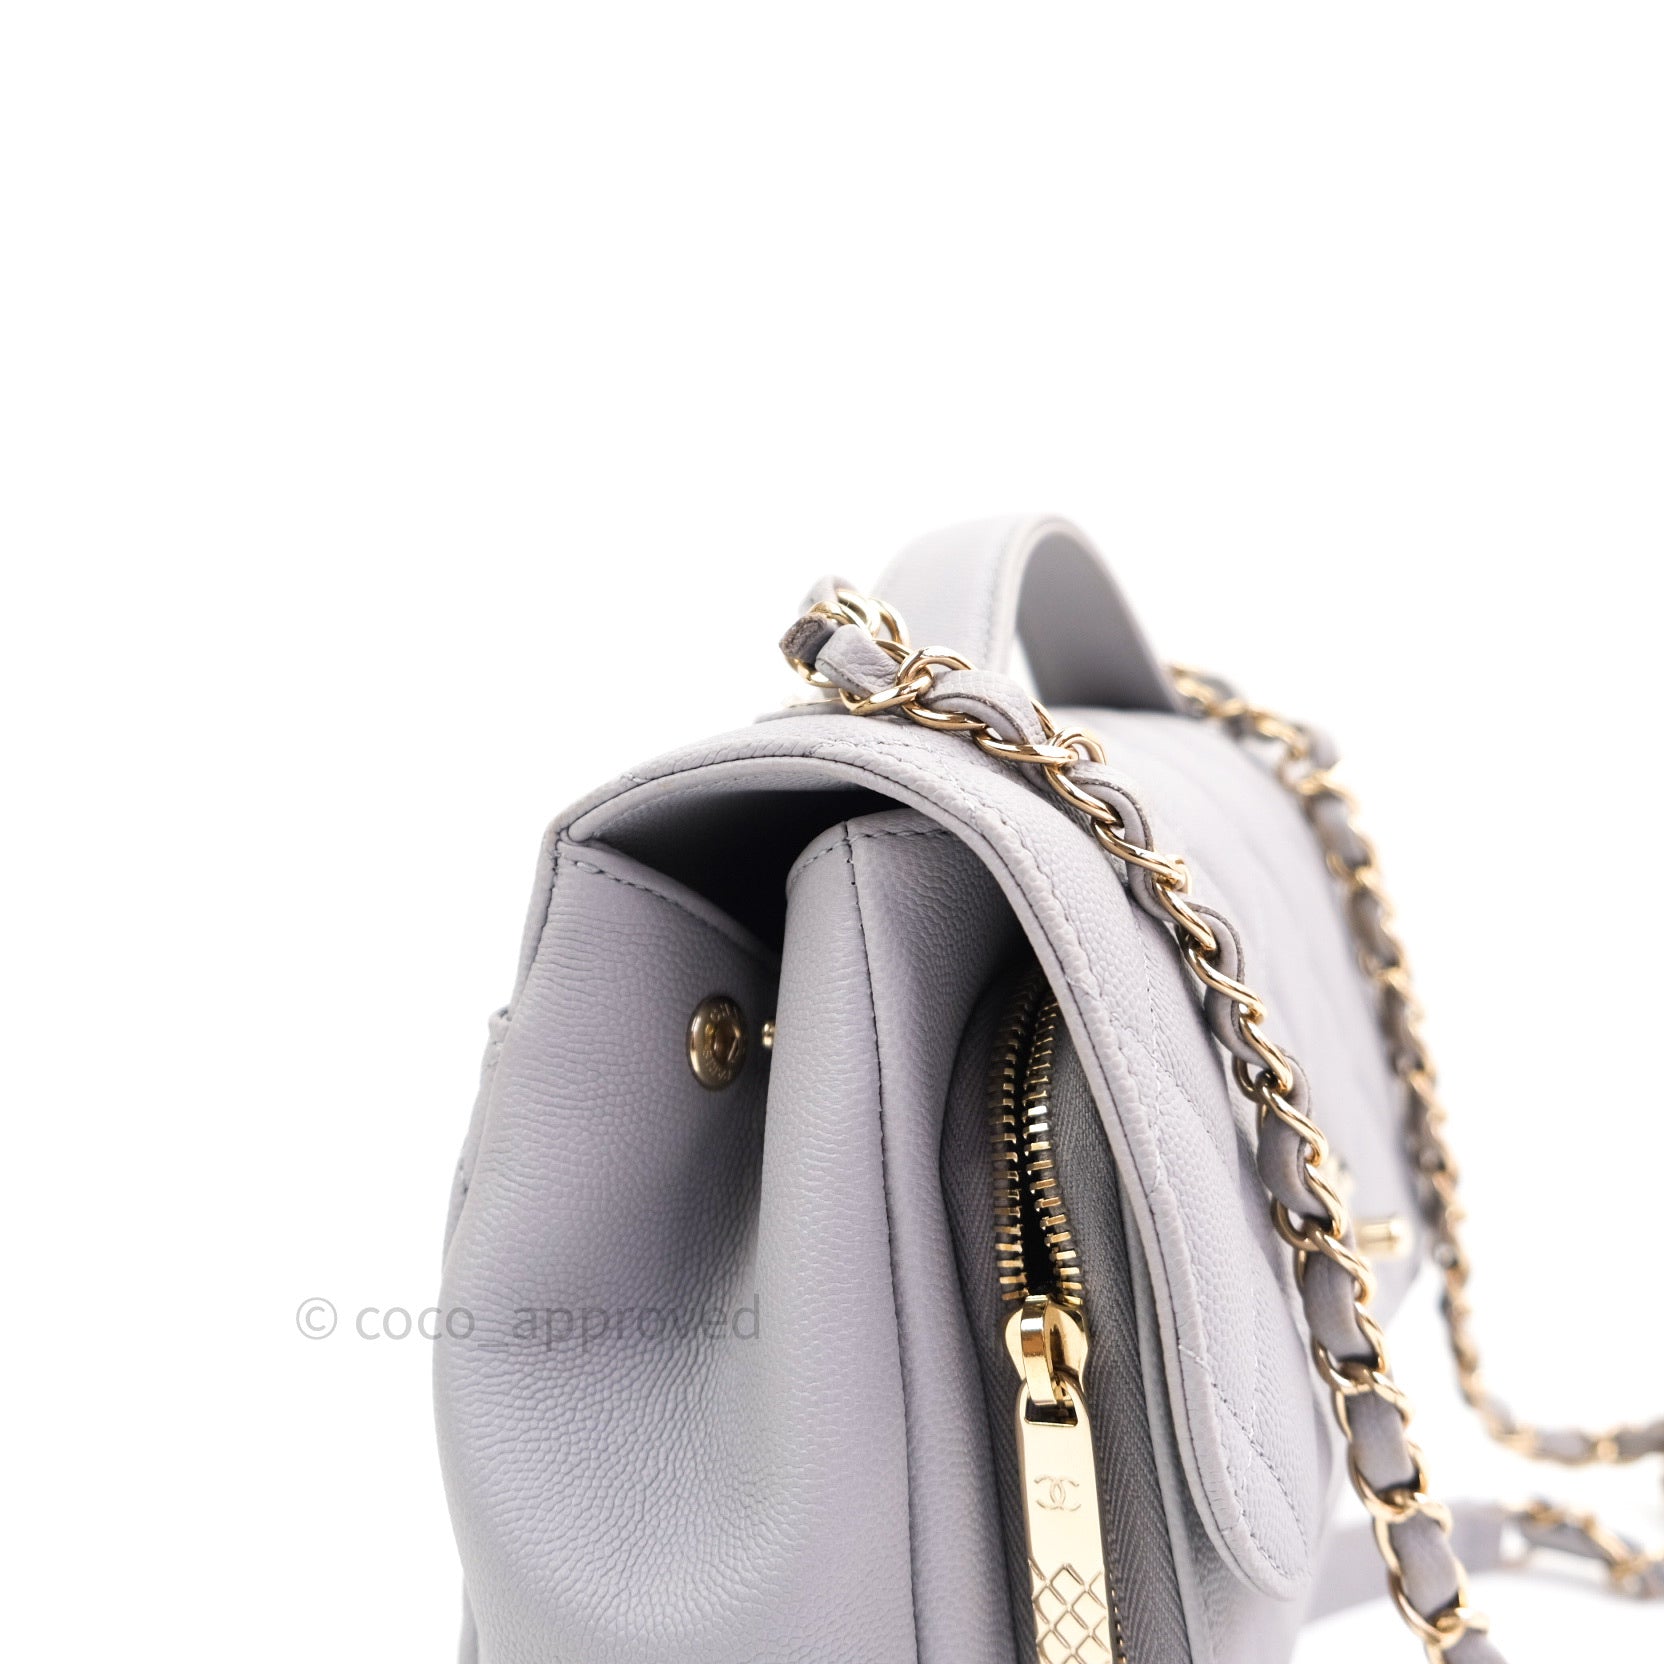 Chanel Gray Medium Business Affinity with Gold Hardware and Chanel